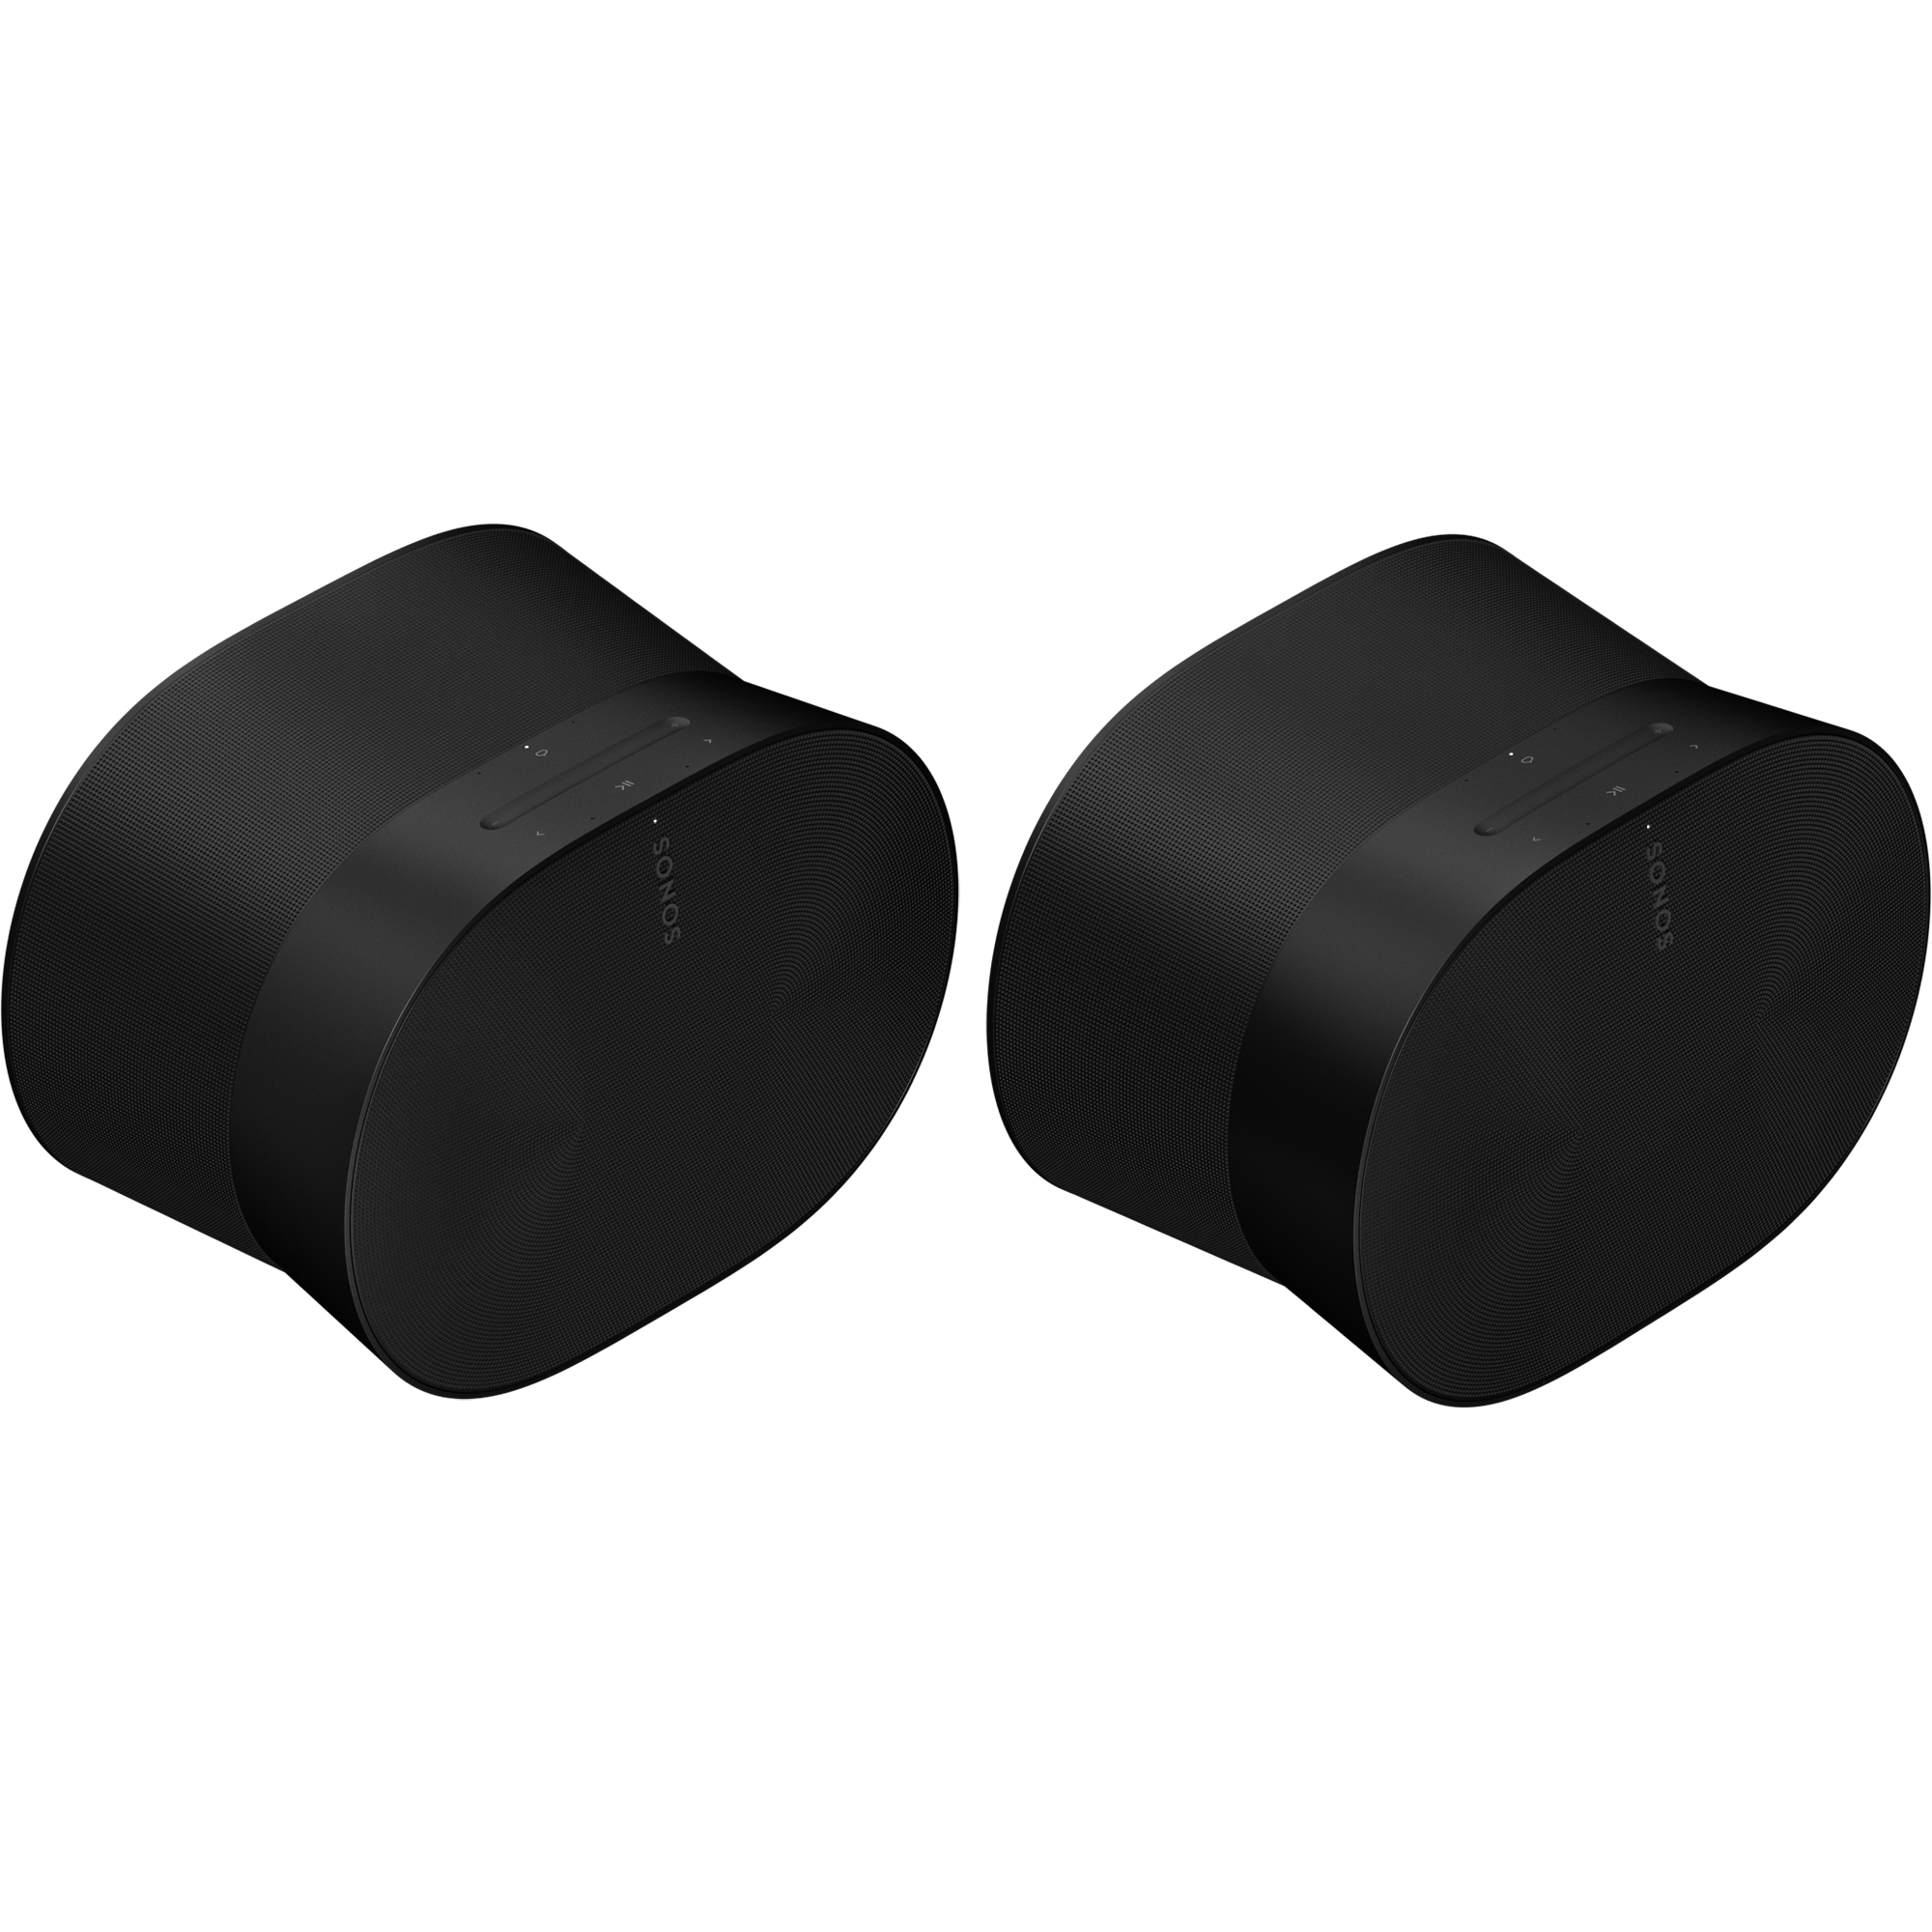 Immersive Music Set with Era 300 Stereo Pair | Sonos